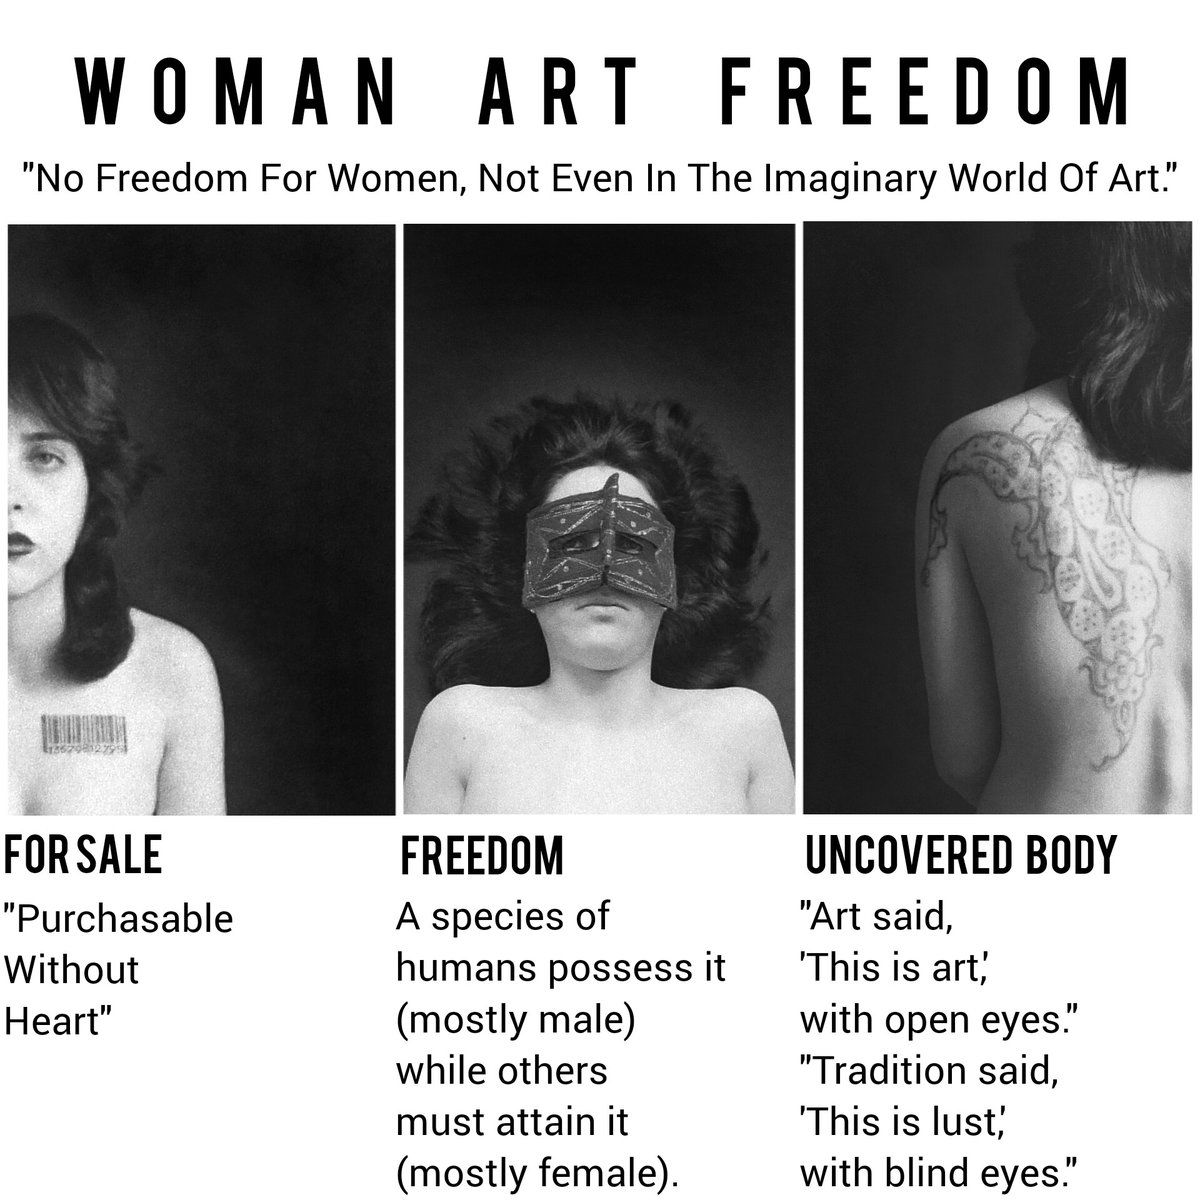 GM🍁 ⬜Title:FOR SALE ⬜Title:FREEDOM ⬜Title:UNCOVERED BODY Collection:Woman Art Freedom 'No Freedom For Women,Not Even In The Imaginary World Of Art' 🔵Canon AnalogCamera & 35mmFilm Artist:@A_Rahaad Curator:@Diba_Adib_art #A_Rahaad 🟡ALT Accept Offer⤵️ foundation.app/collection/wom…